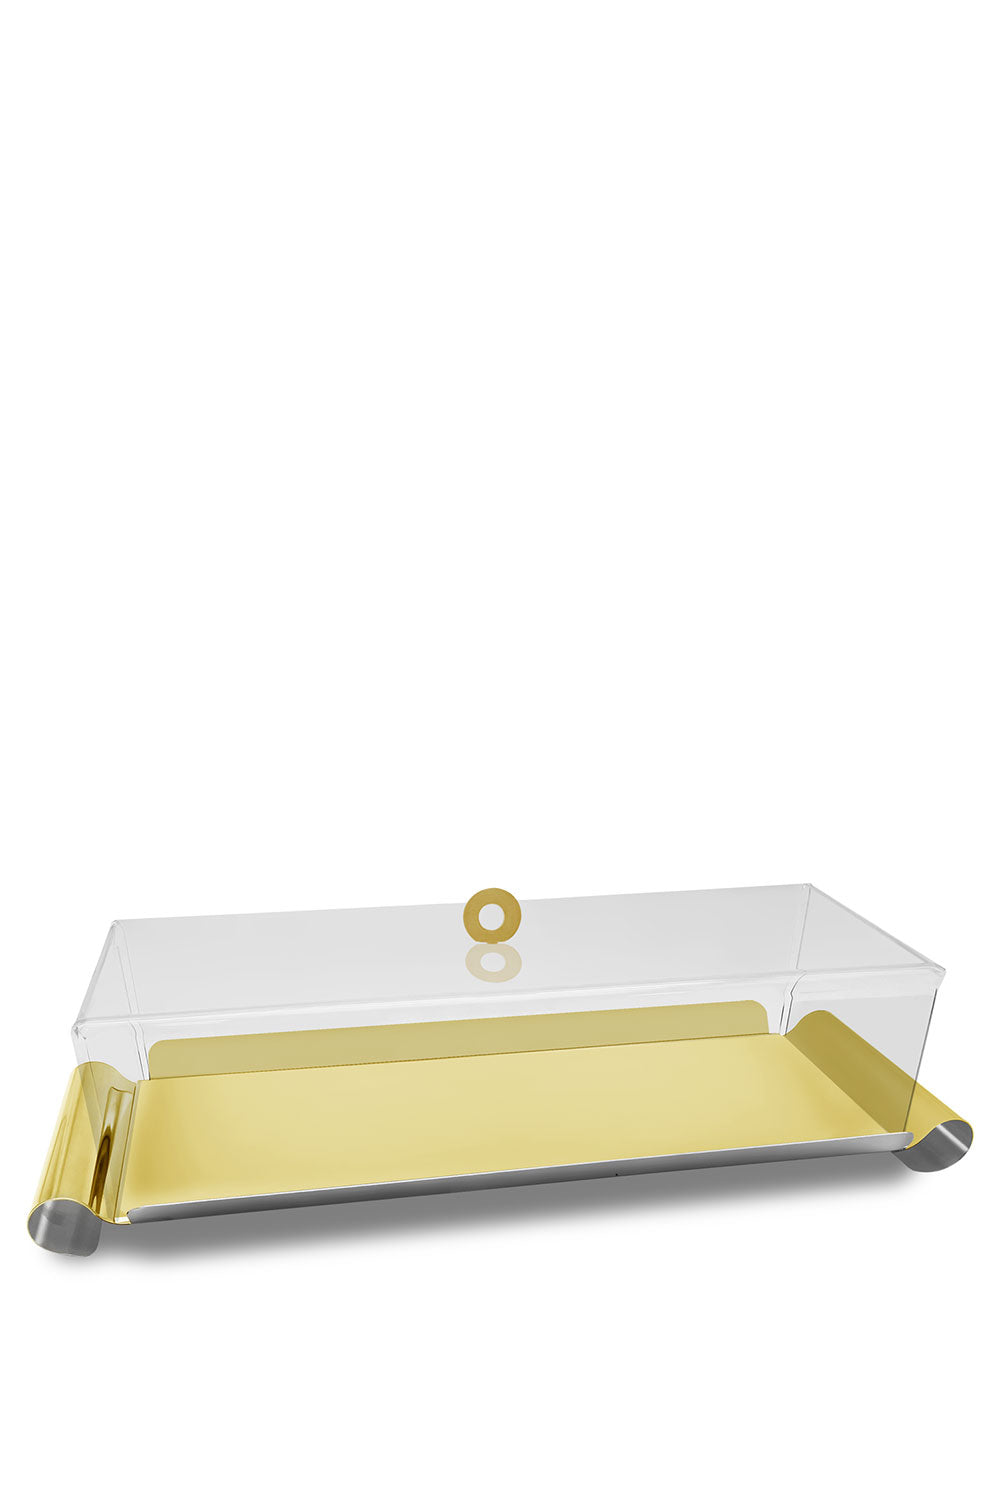 Deluxe Long Tray, Gold, 47x17cm